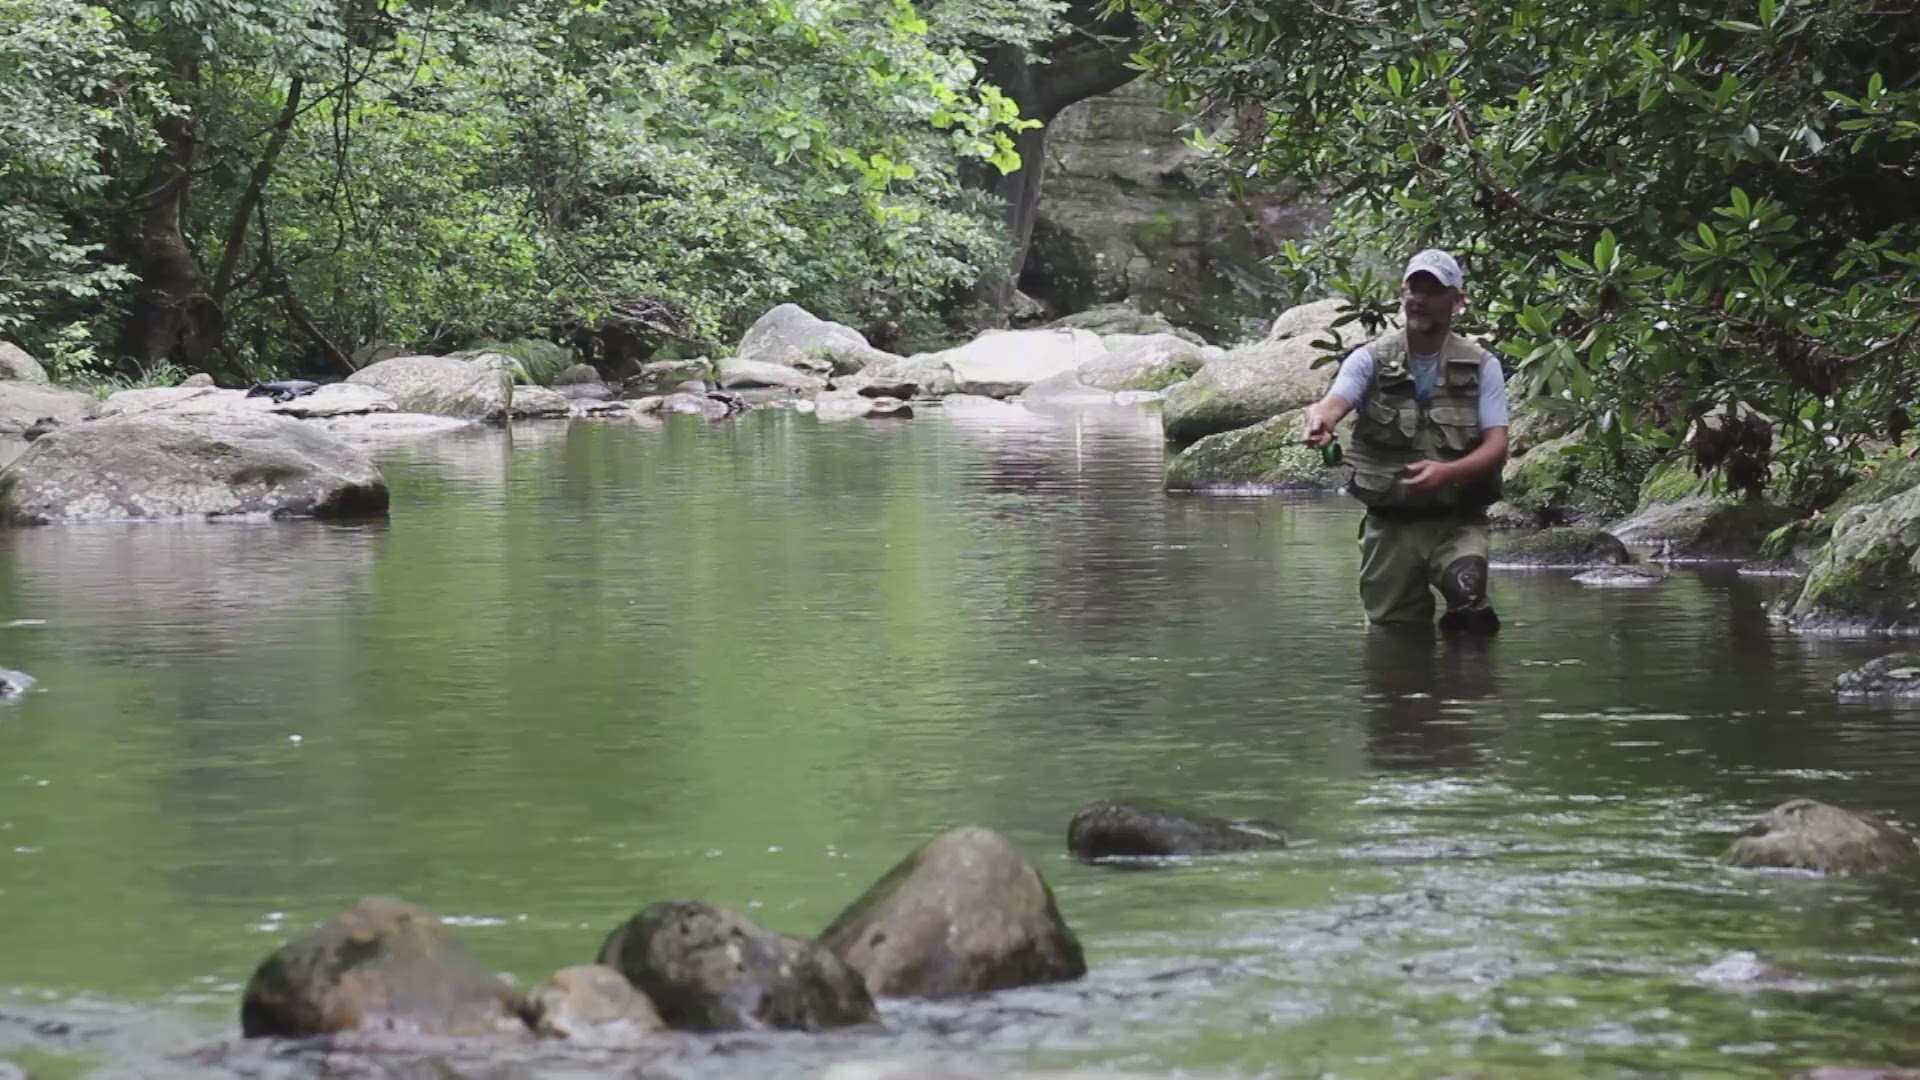 Two veterans from North Carolina find peace from PTSD within the fish filled rivers of South Mountain. They are part of Project Healing Waters, a nationwide non-profit organization that provides recovery for those who served our country through the art of